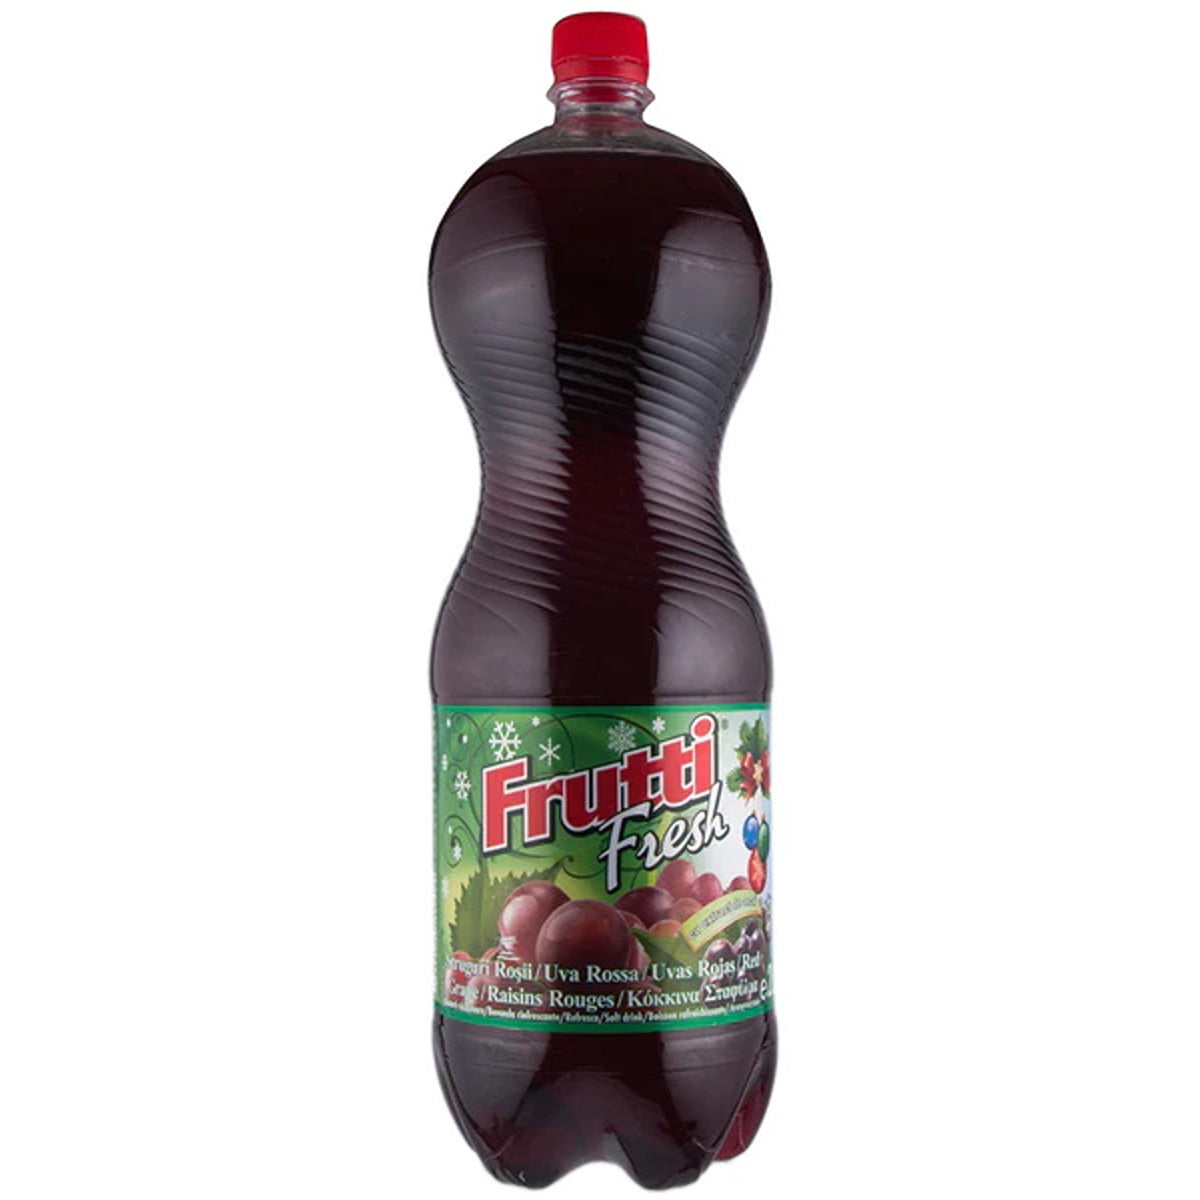 A bottle of Frutti Fresh - Red Grapes Flavour Drink - 2L on a white background.